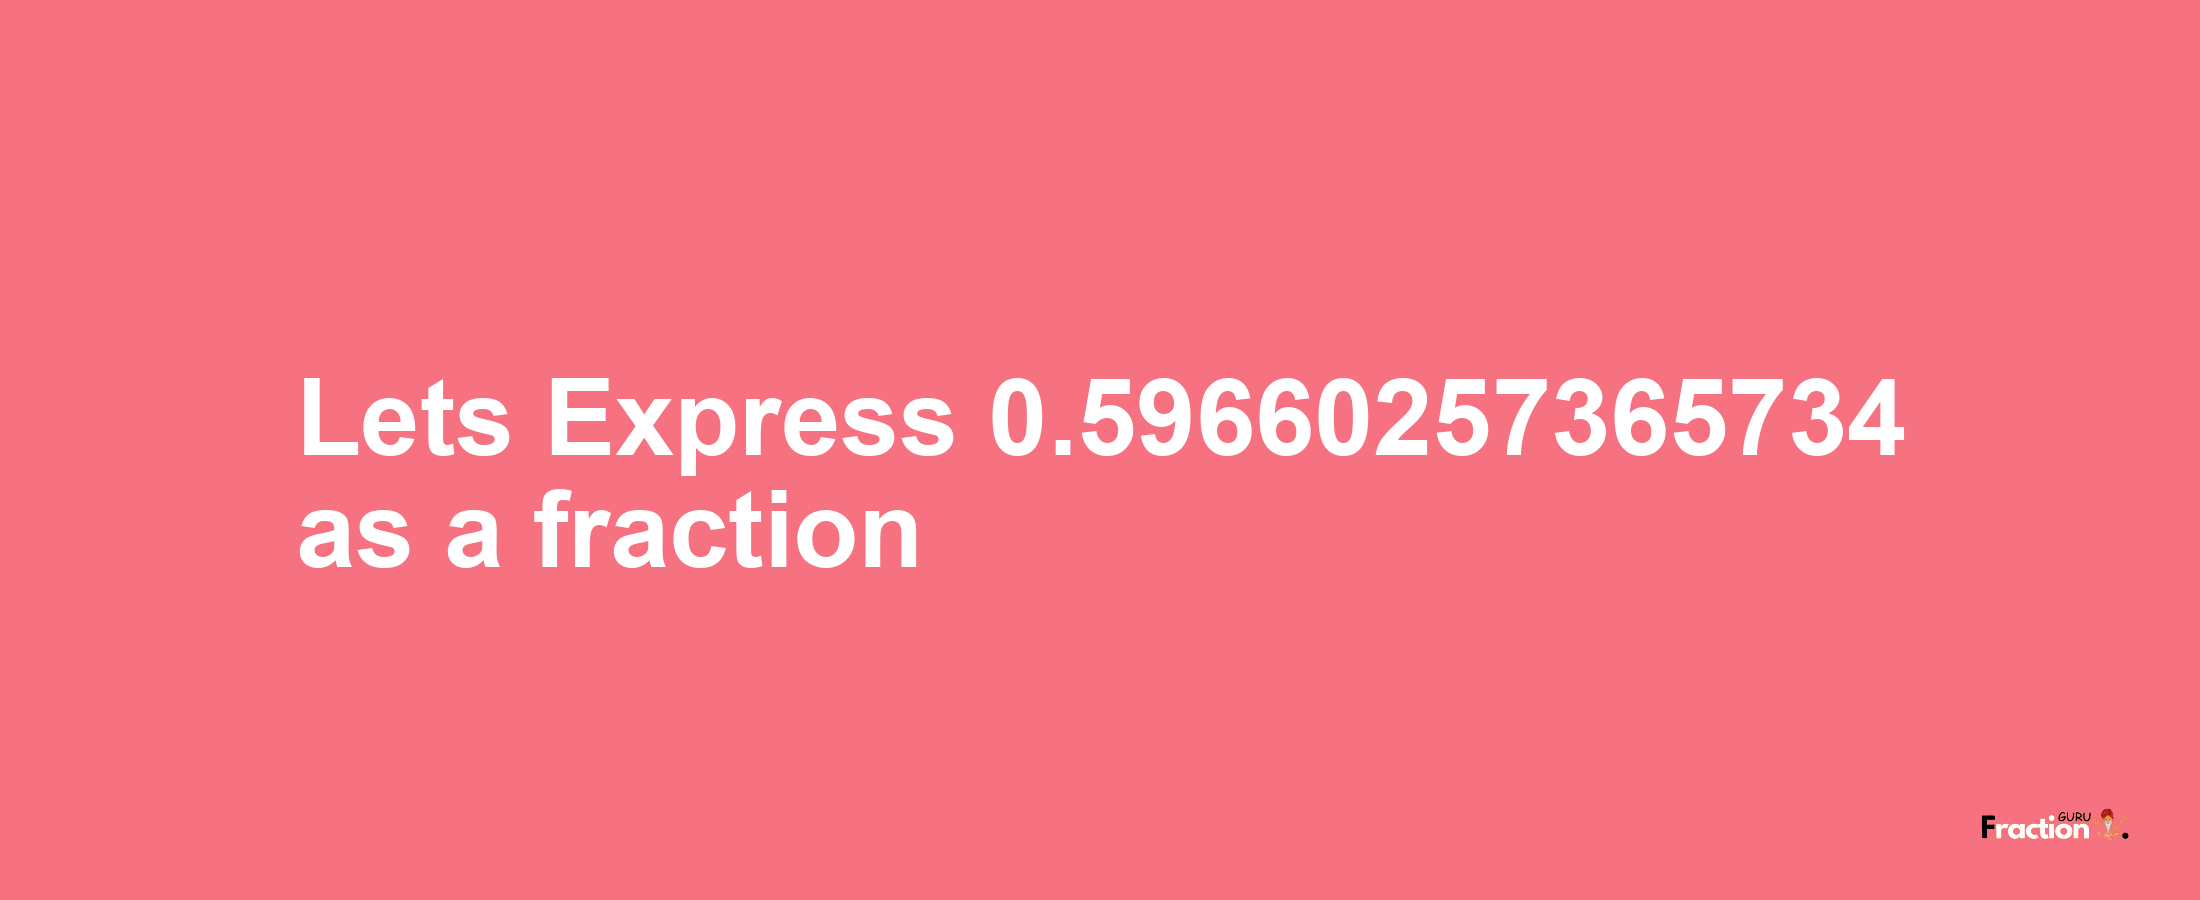 Lets Express 0.59660257365734 as afraction